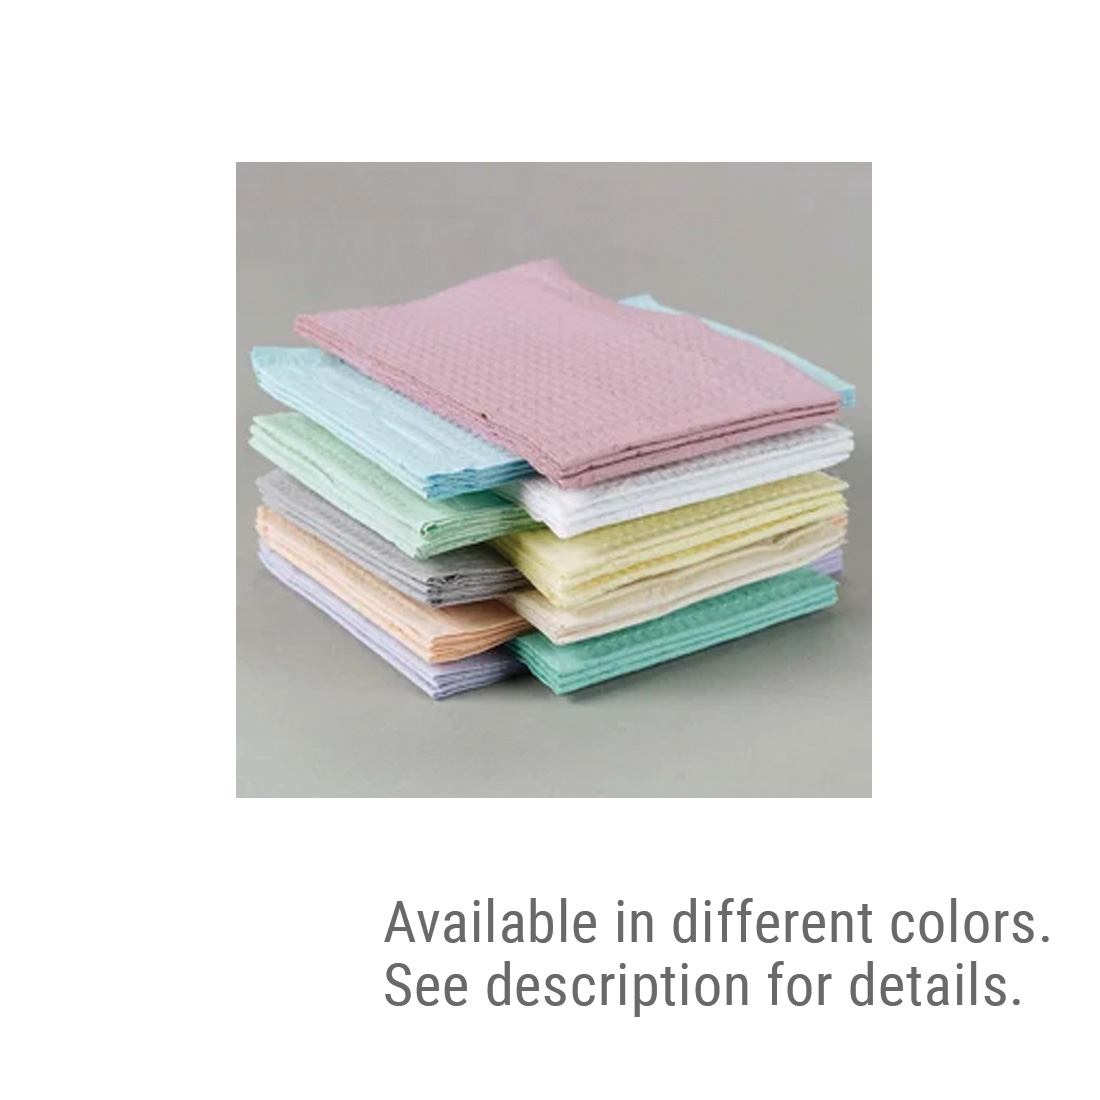 Patient Towel Tissue/Poly 13" x 18" 2-Ply Teal - 500/Case